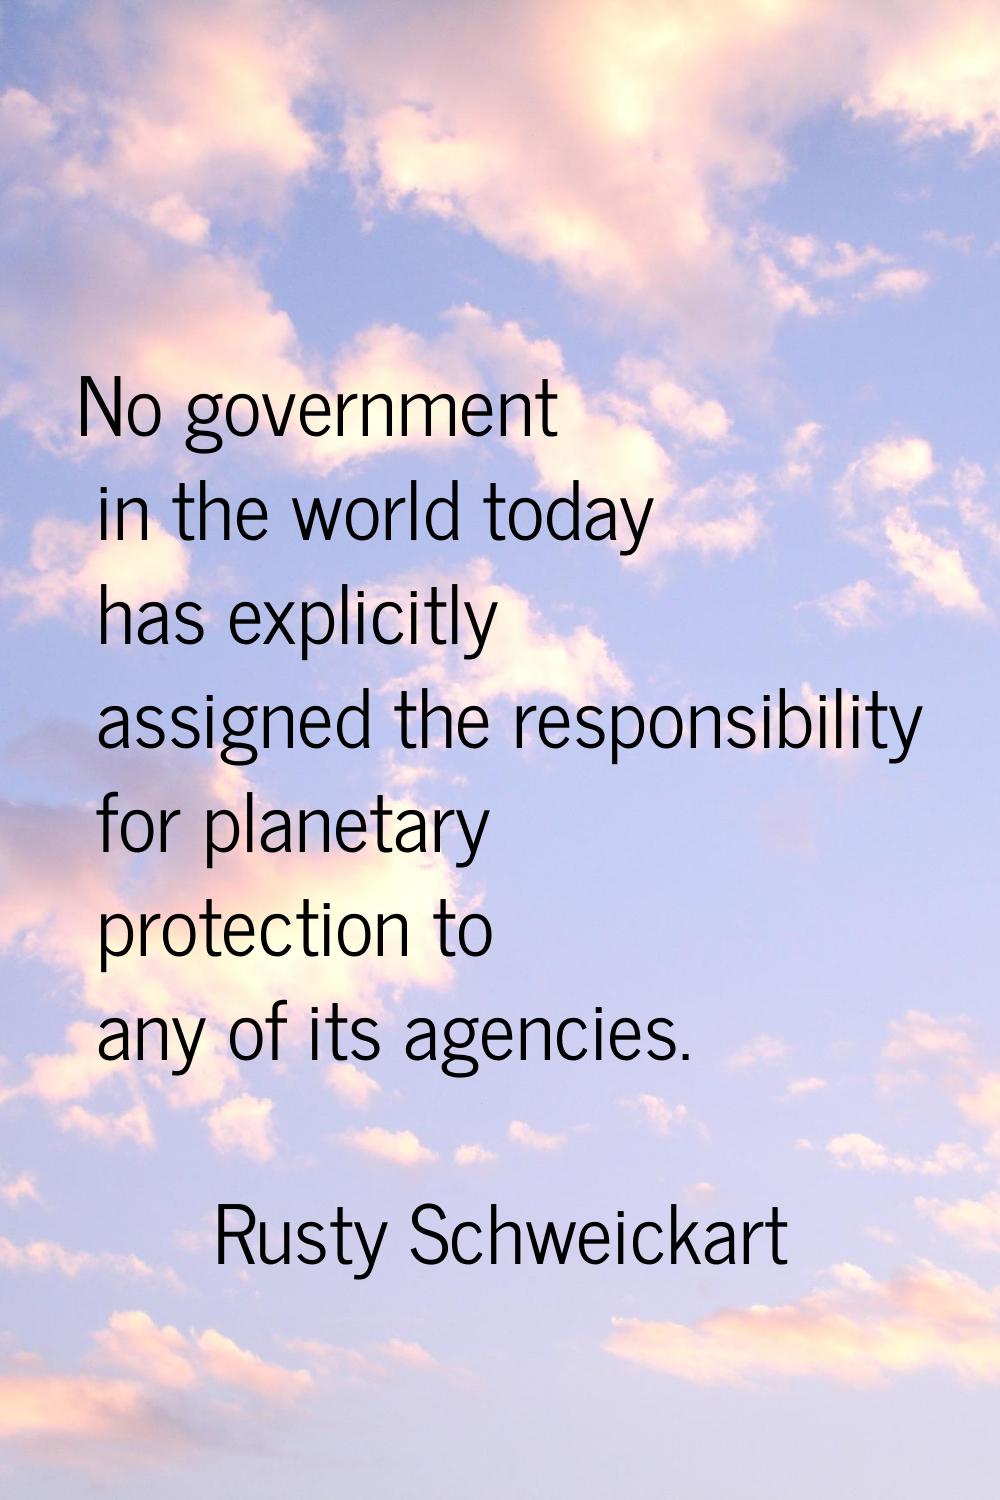 No government in the world today has explicitly assigned the responsibility for planetary protectio